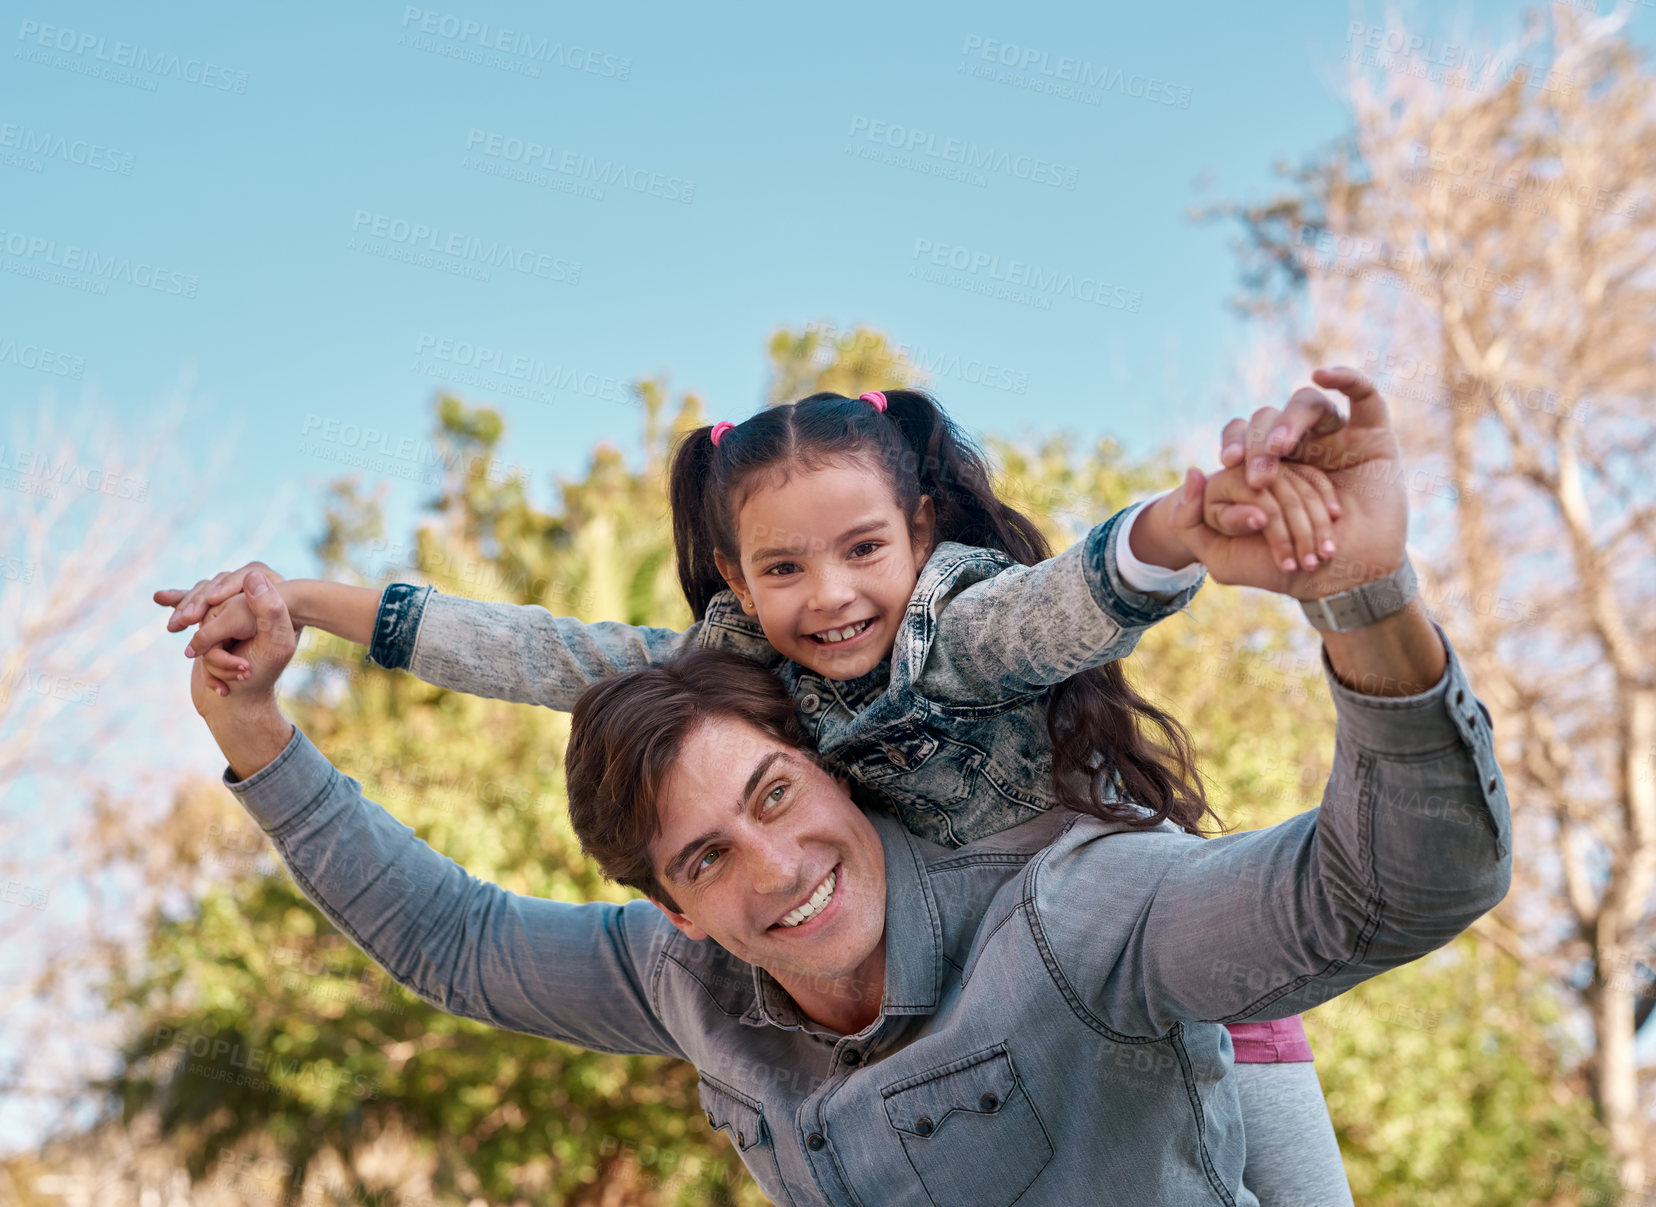 Buy stock photo Shot of an adorable little girl enjoying a piggyback ride with her father at the park